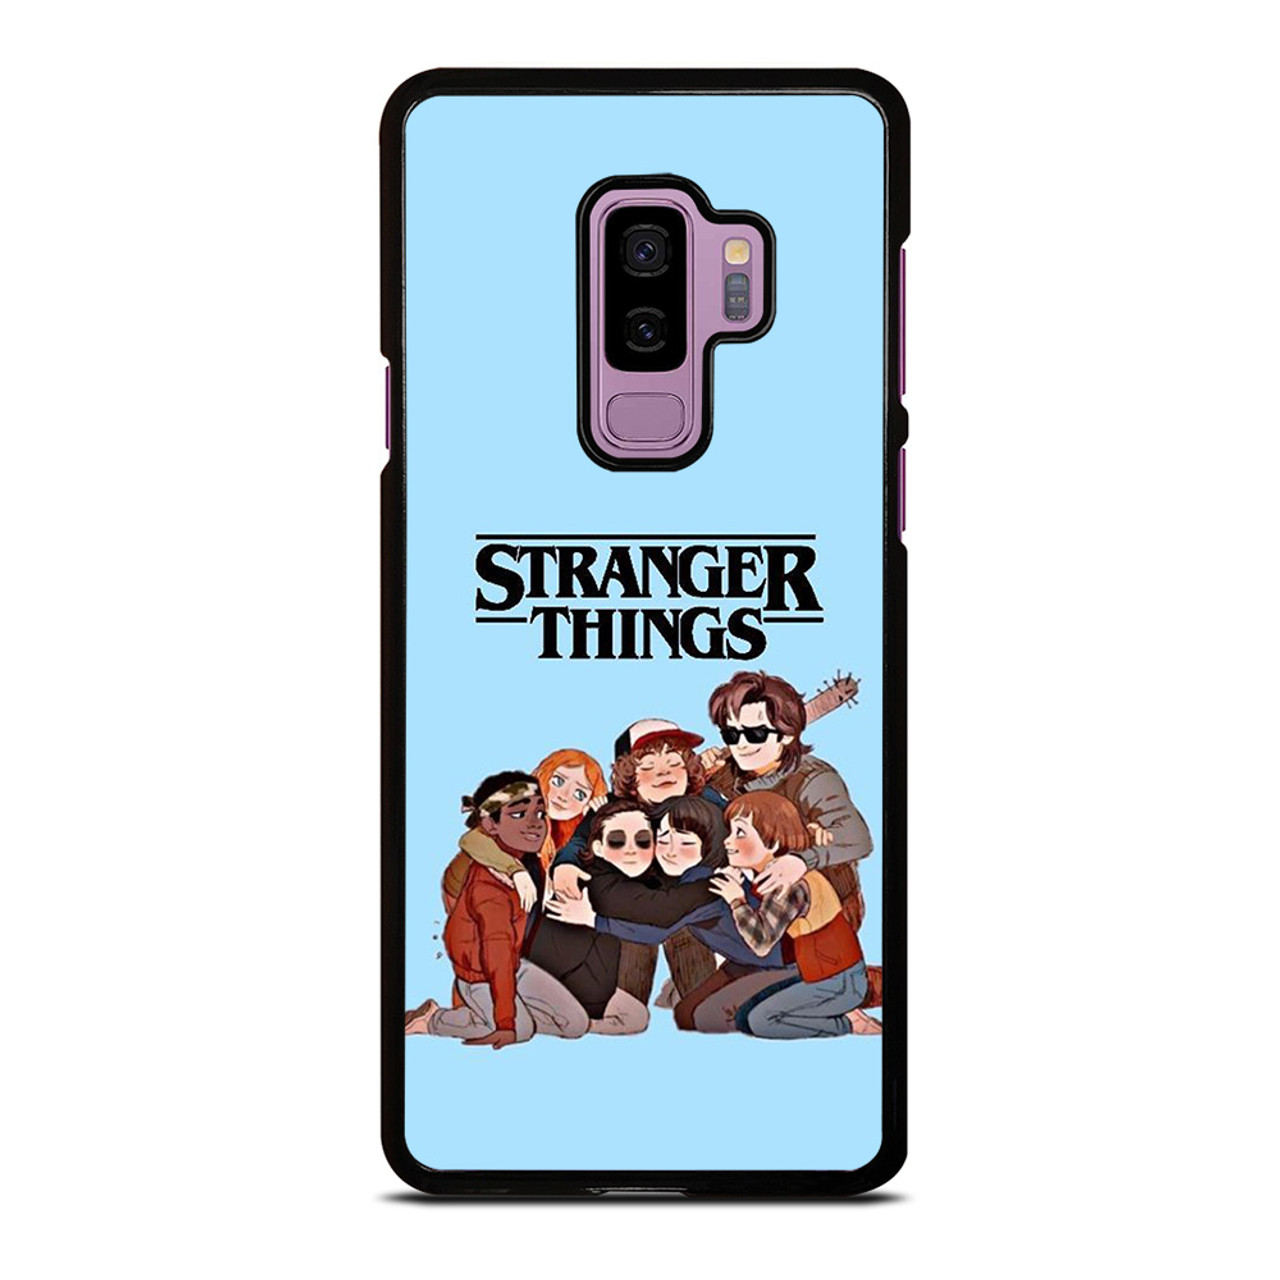 STRANGER THINGS CARTOON CHARACTERS Samsung Galaxy S9 Plus Case Cover